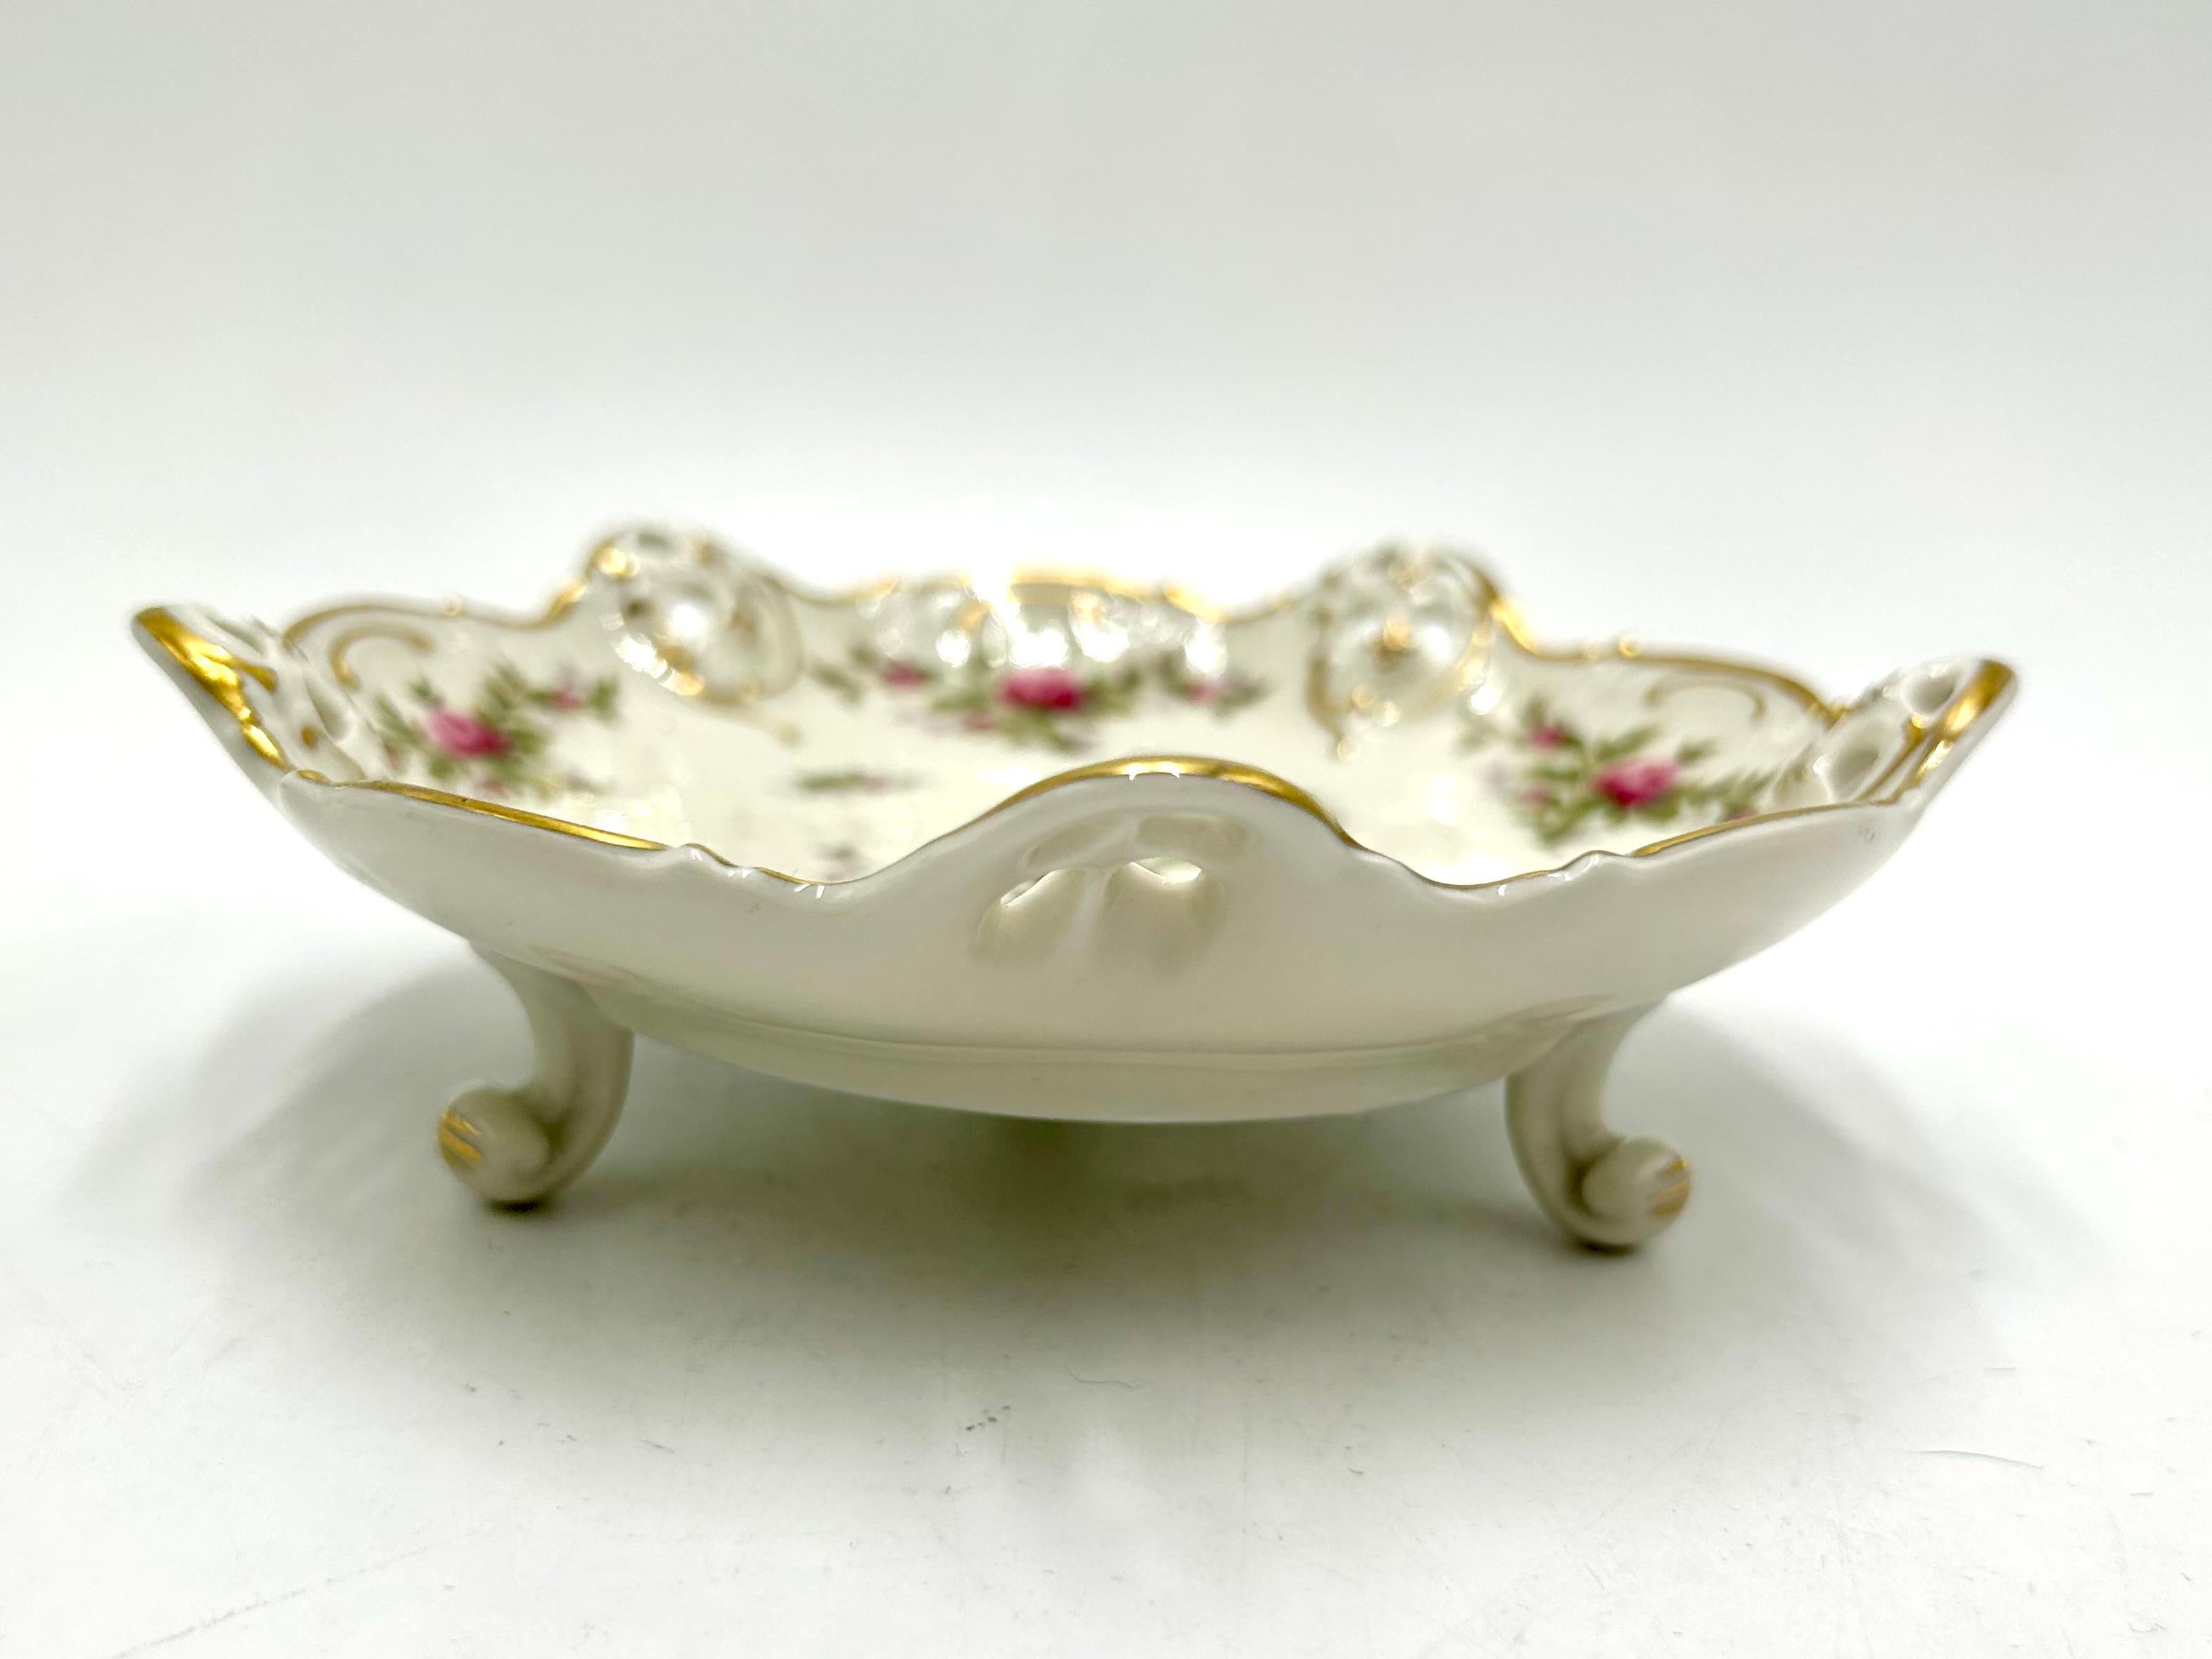 Openwork plate supported on three filigree legs from the Moliere collection, the renowned German Rosenthal label. The product is marked with the mark used in the years 1938-1952. Porcelain in ecru color decorated with openwork sides, rose motif and